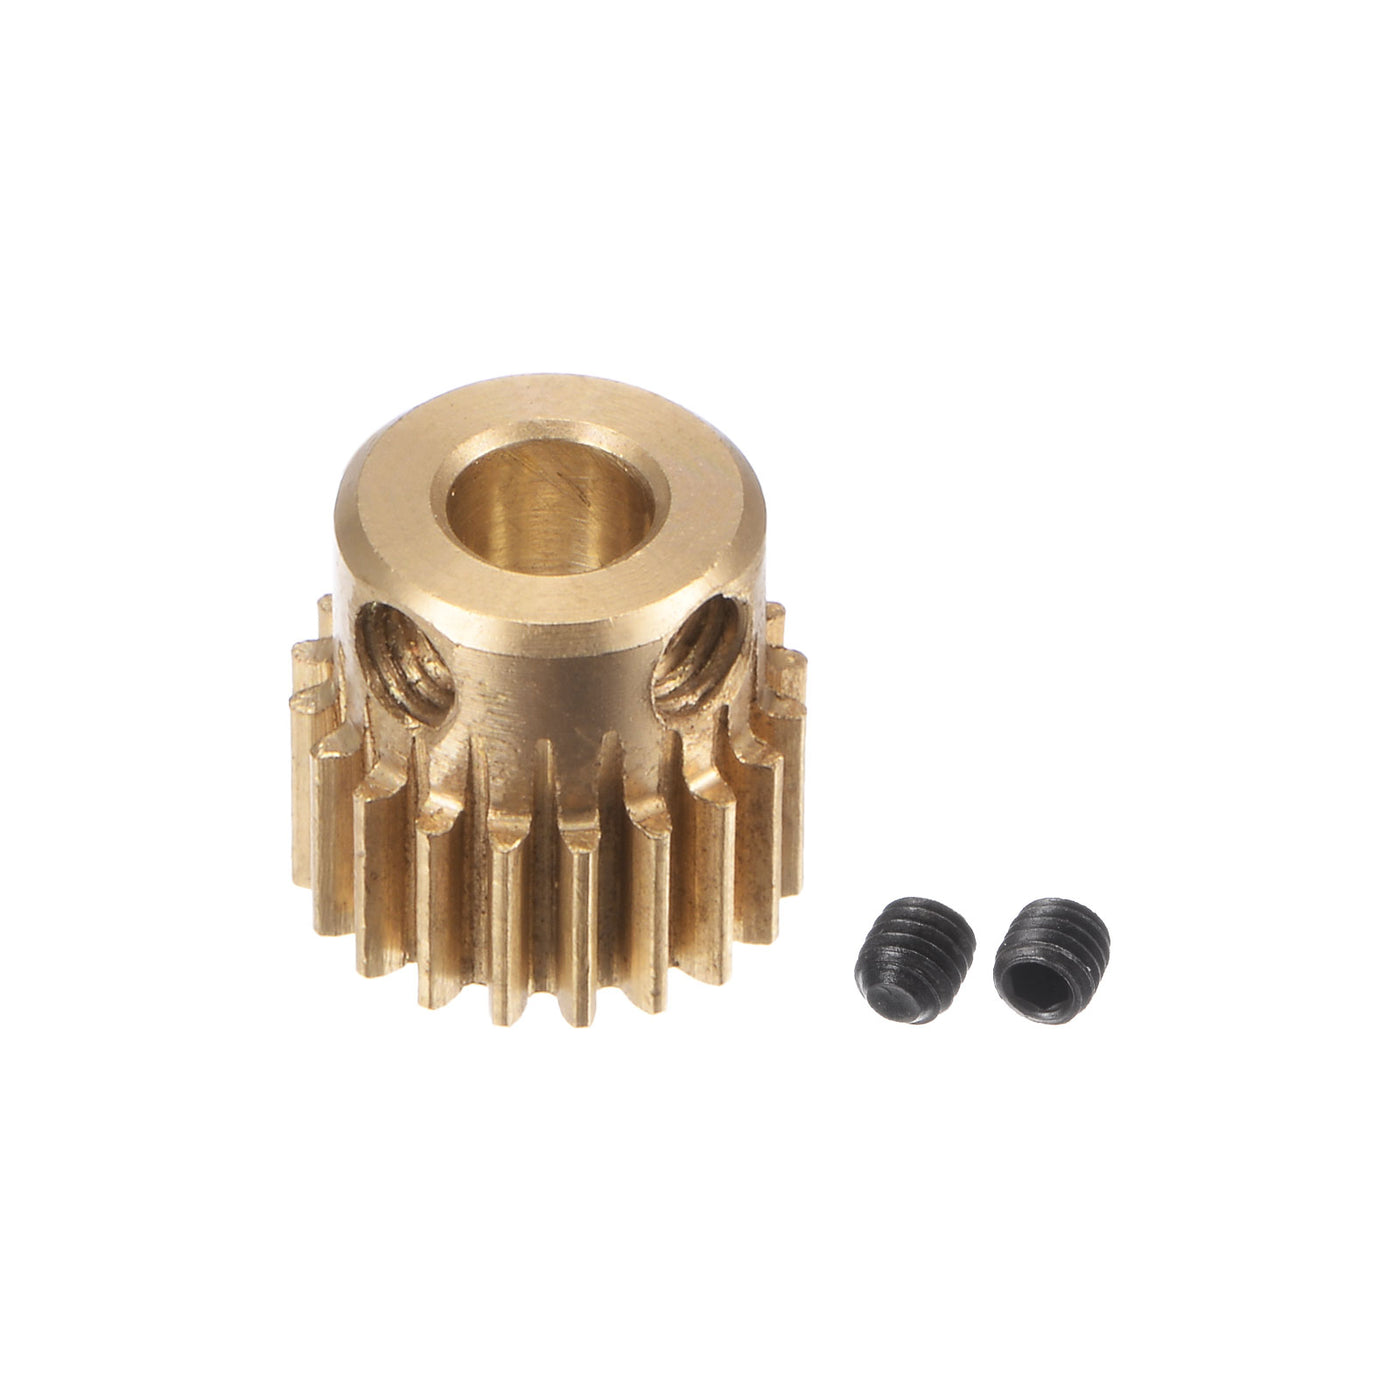 uxcell Uxcell 0.5 Mod 20T 4mm Bore 11mm Outer Dia Brass Motor Rack Pinion Gear with Screws